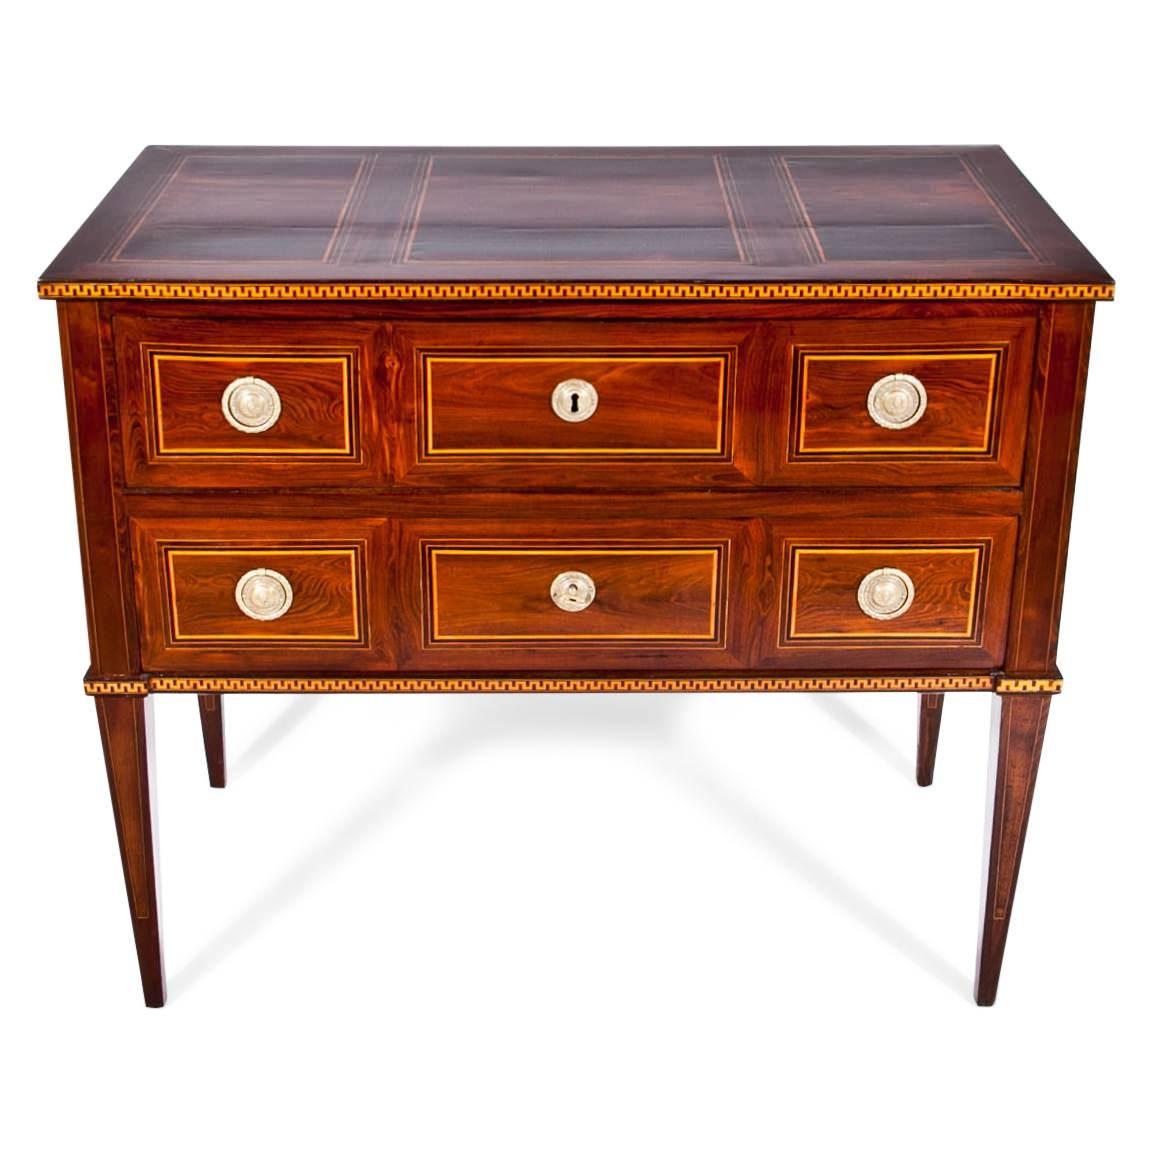 Two-drawered chest of drawers on tall tapered legs. The chest shows a beautiful walnut veneer with maple inlays on the top, front and meander strips on the edges.